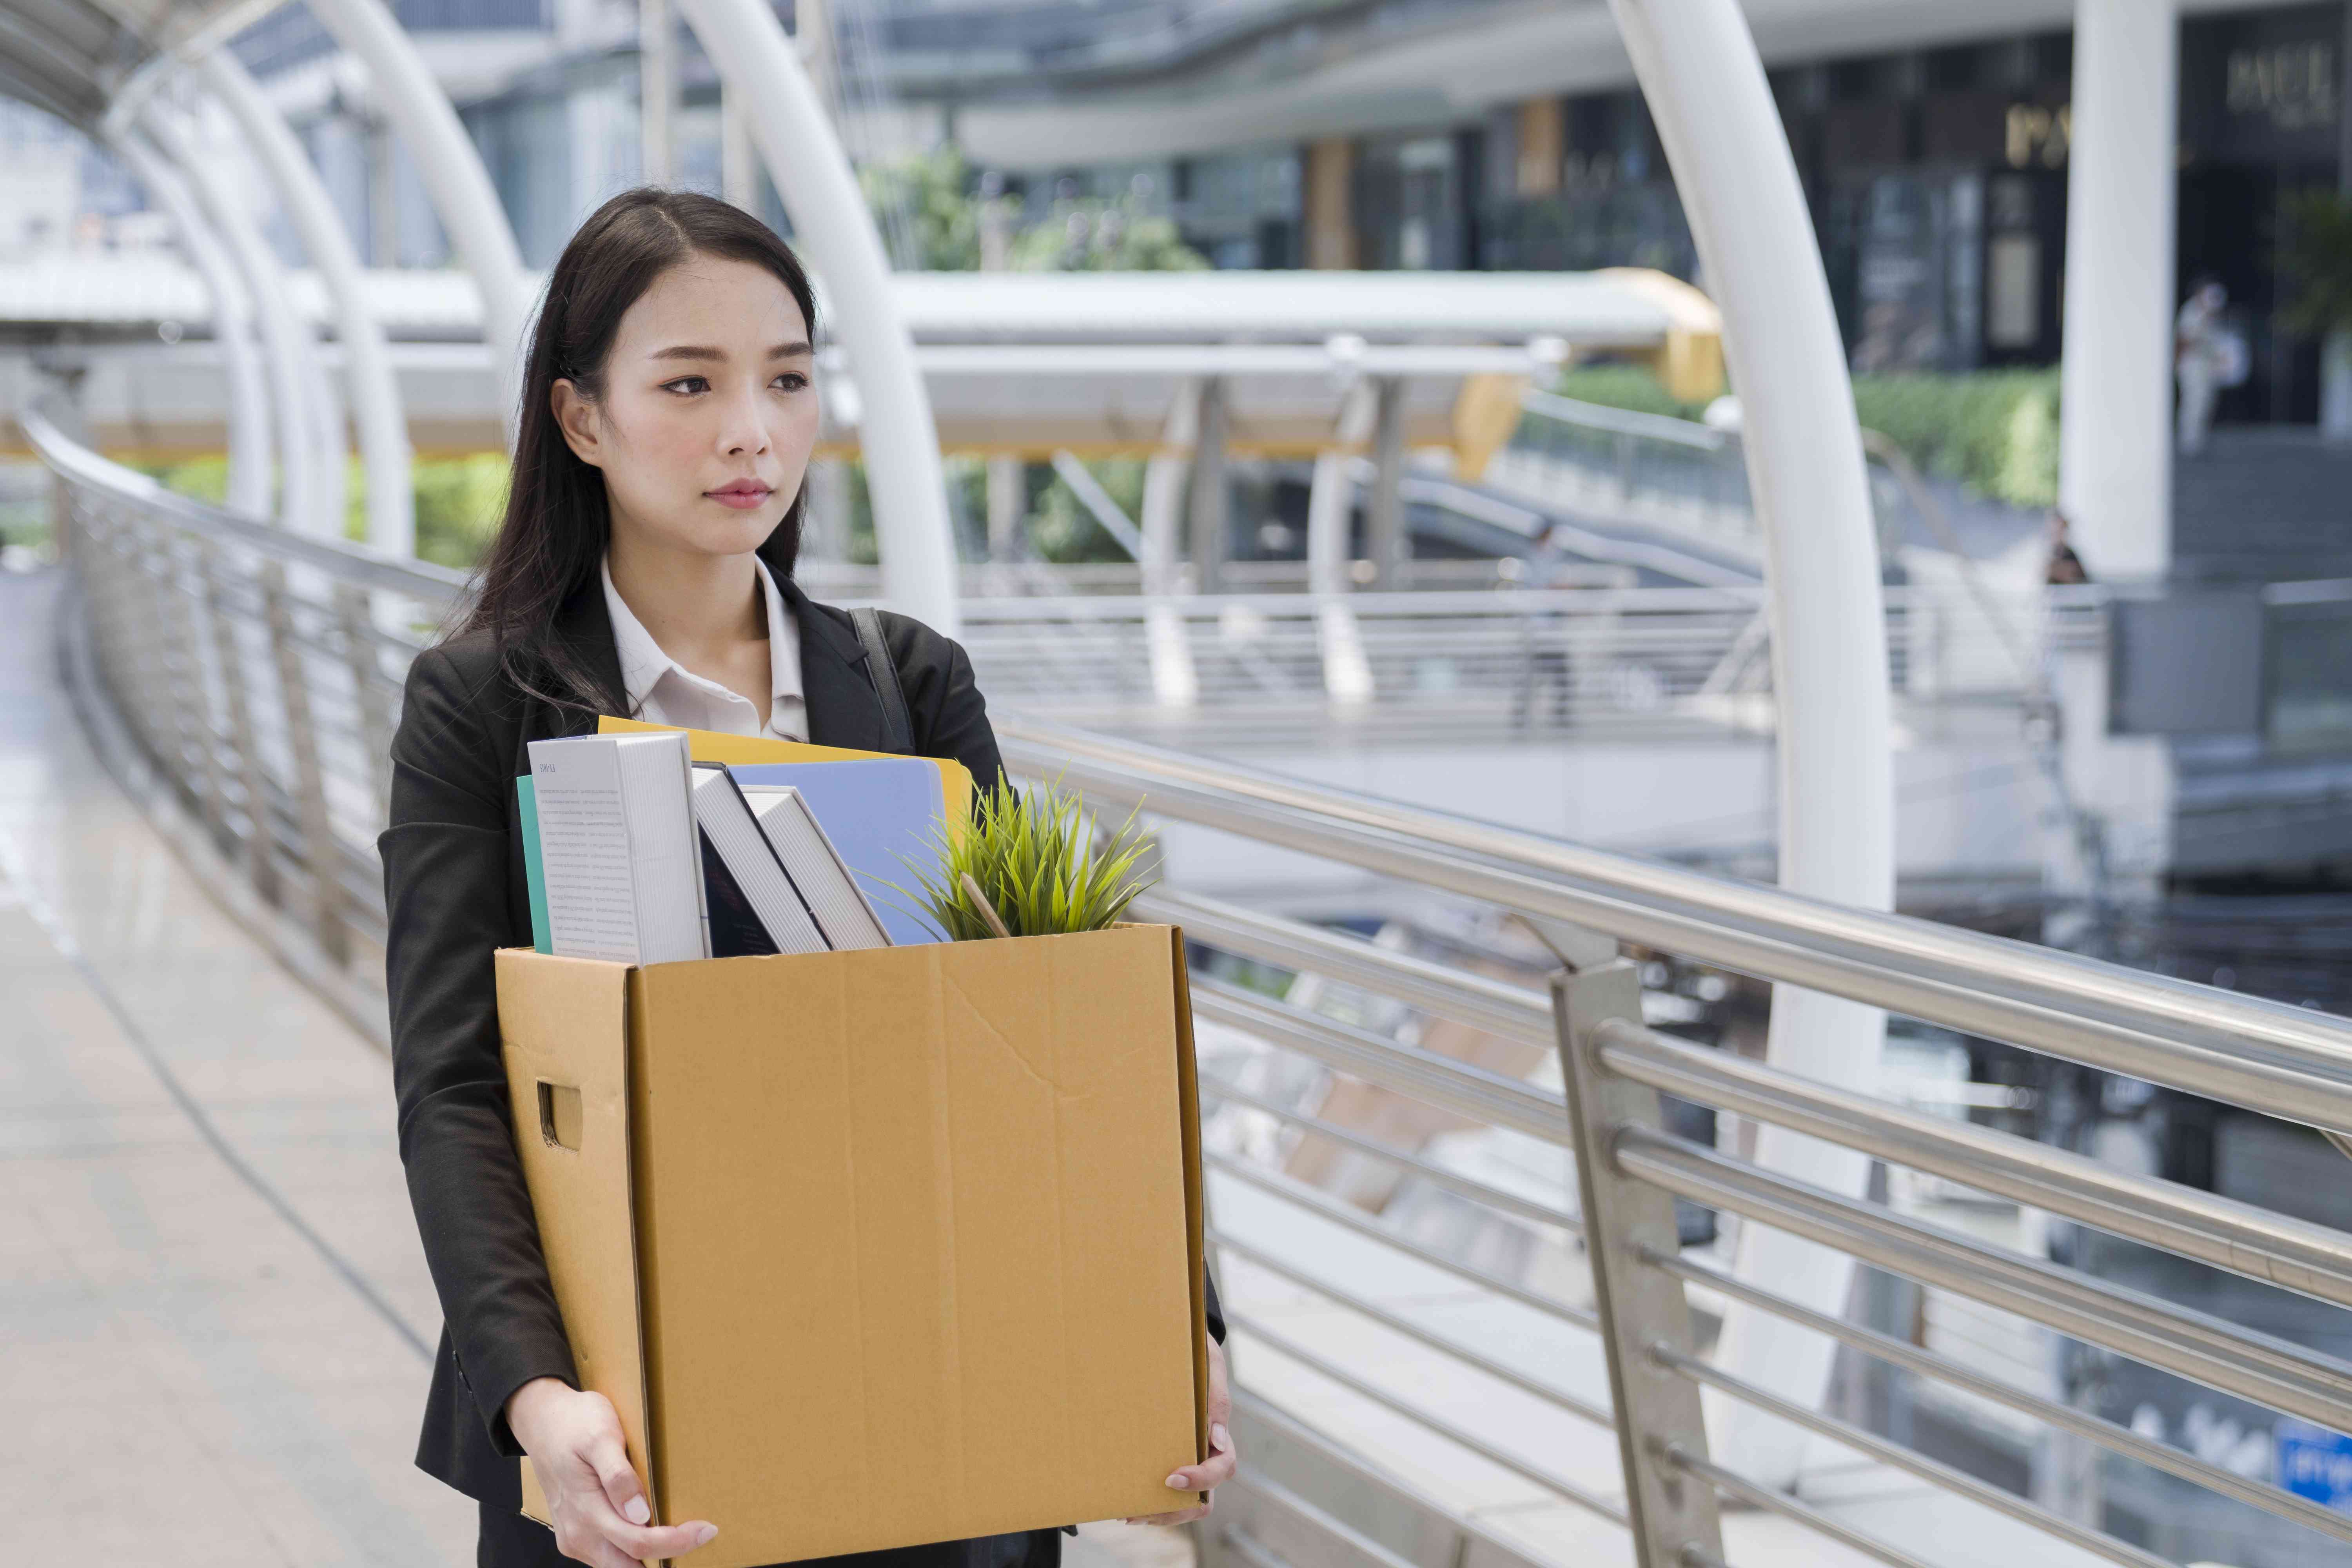 Woman carrying a box of work supplies away from an office building